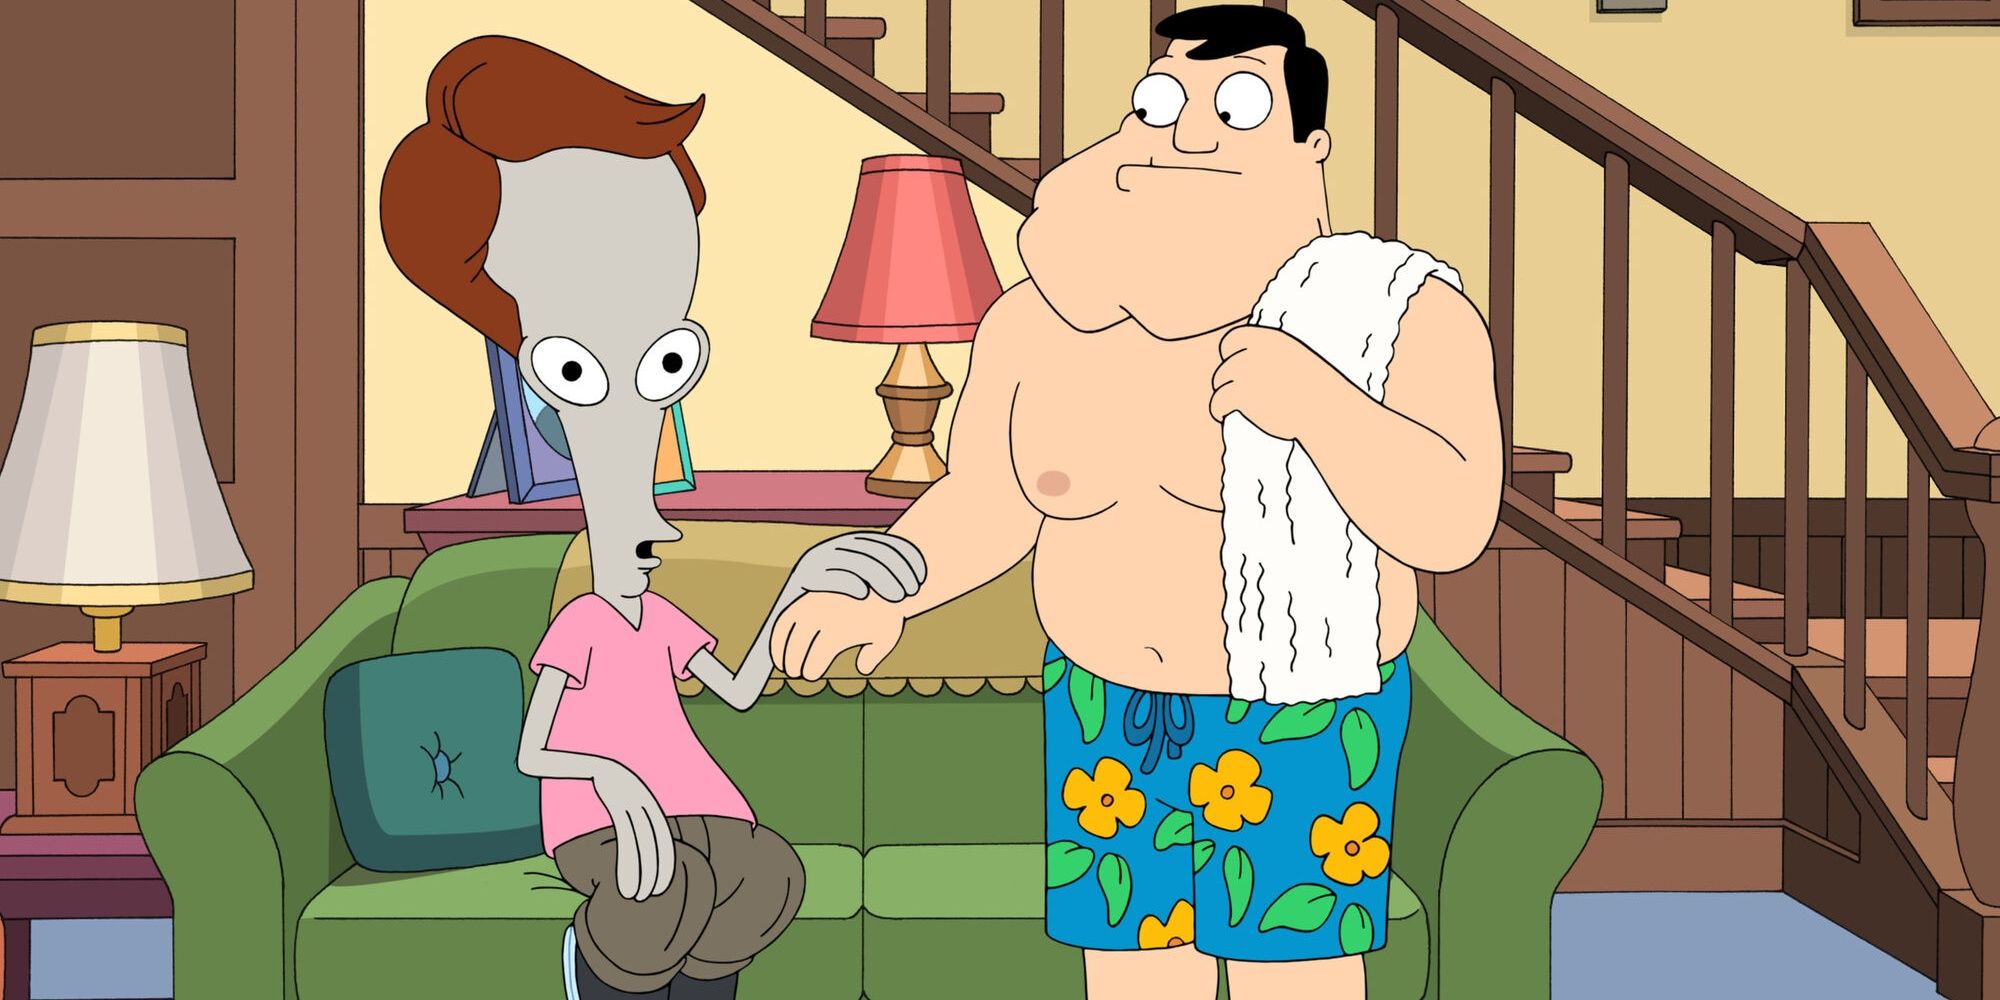 Roger's pupils dilate while with Stan in American Dad